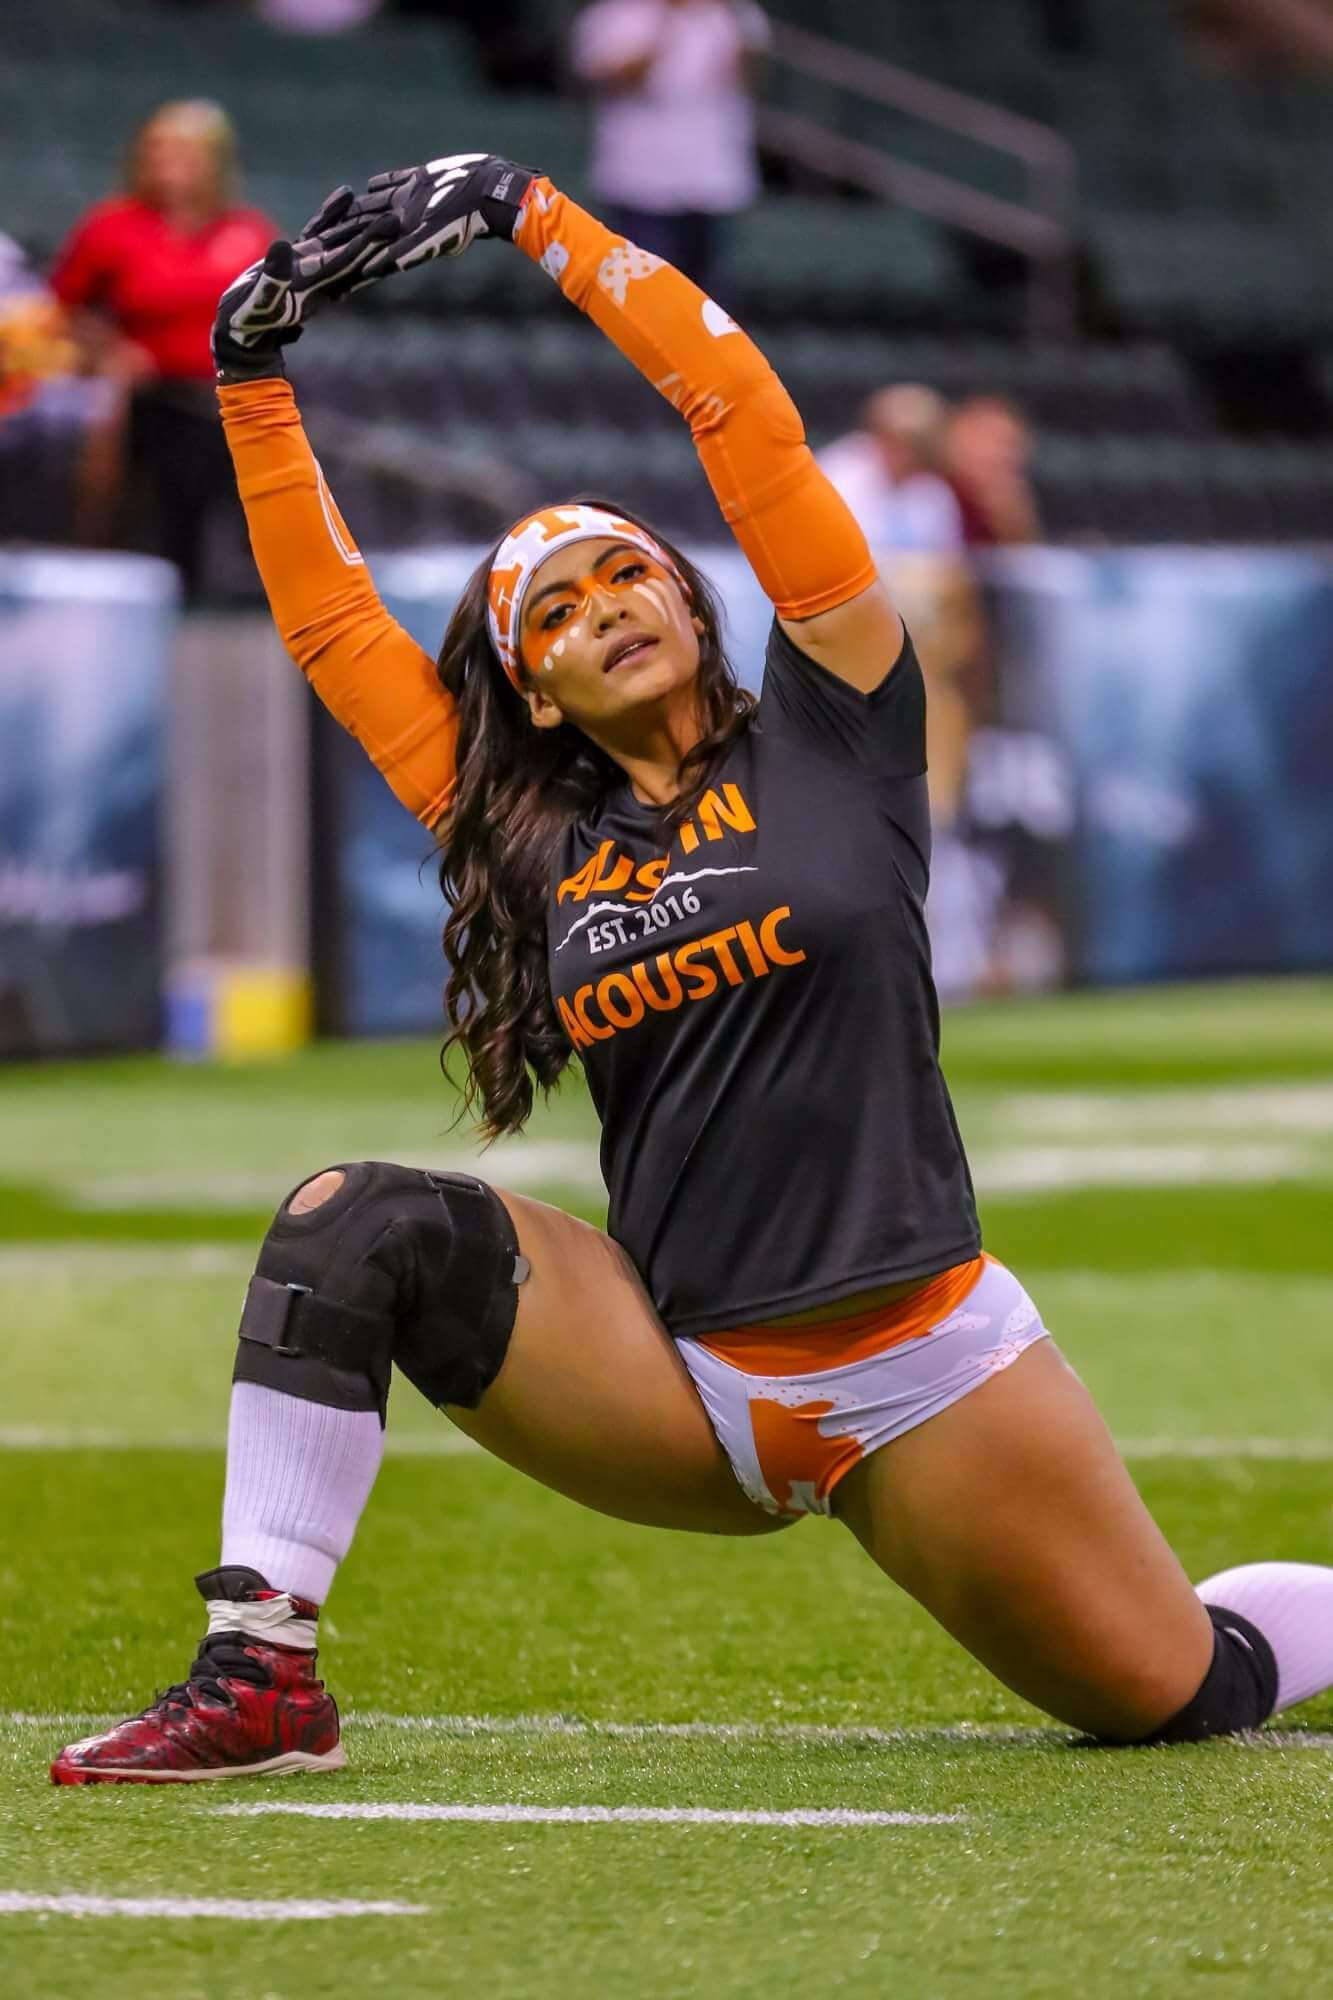 The Legends Football League Beautiful Women And Football, Need We Say Anymore! 11